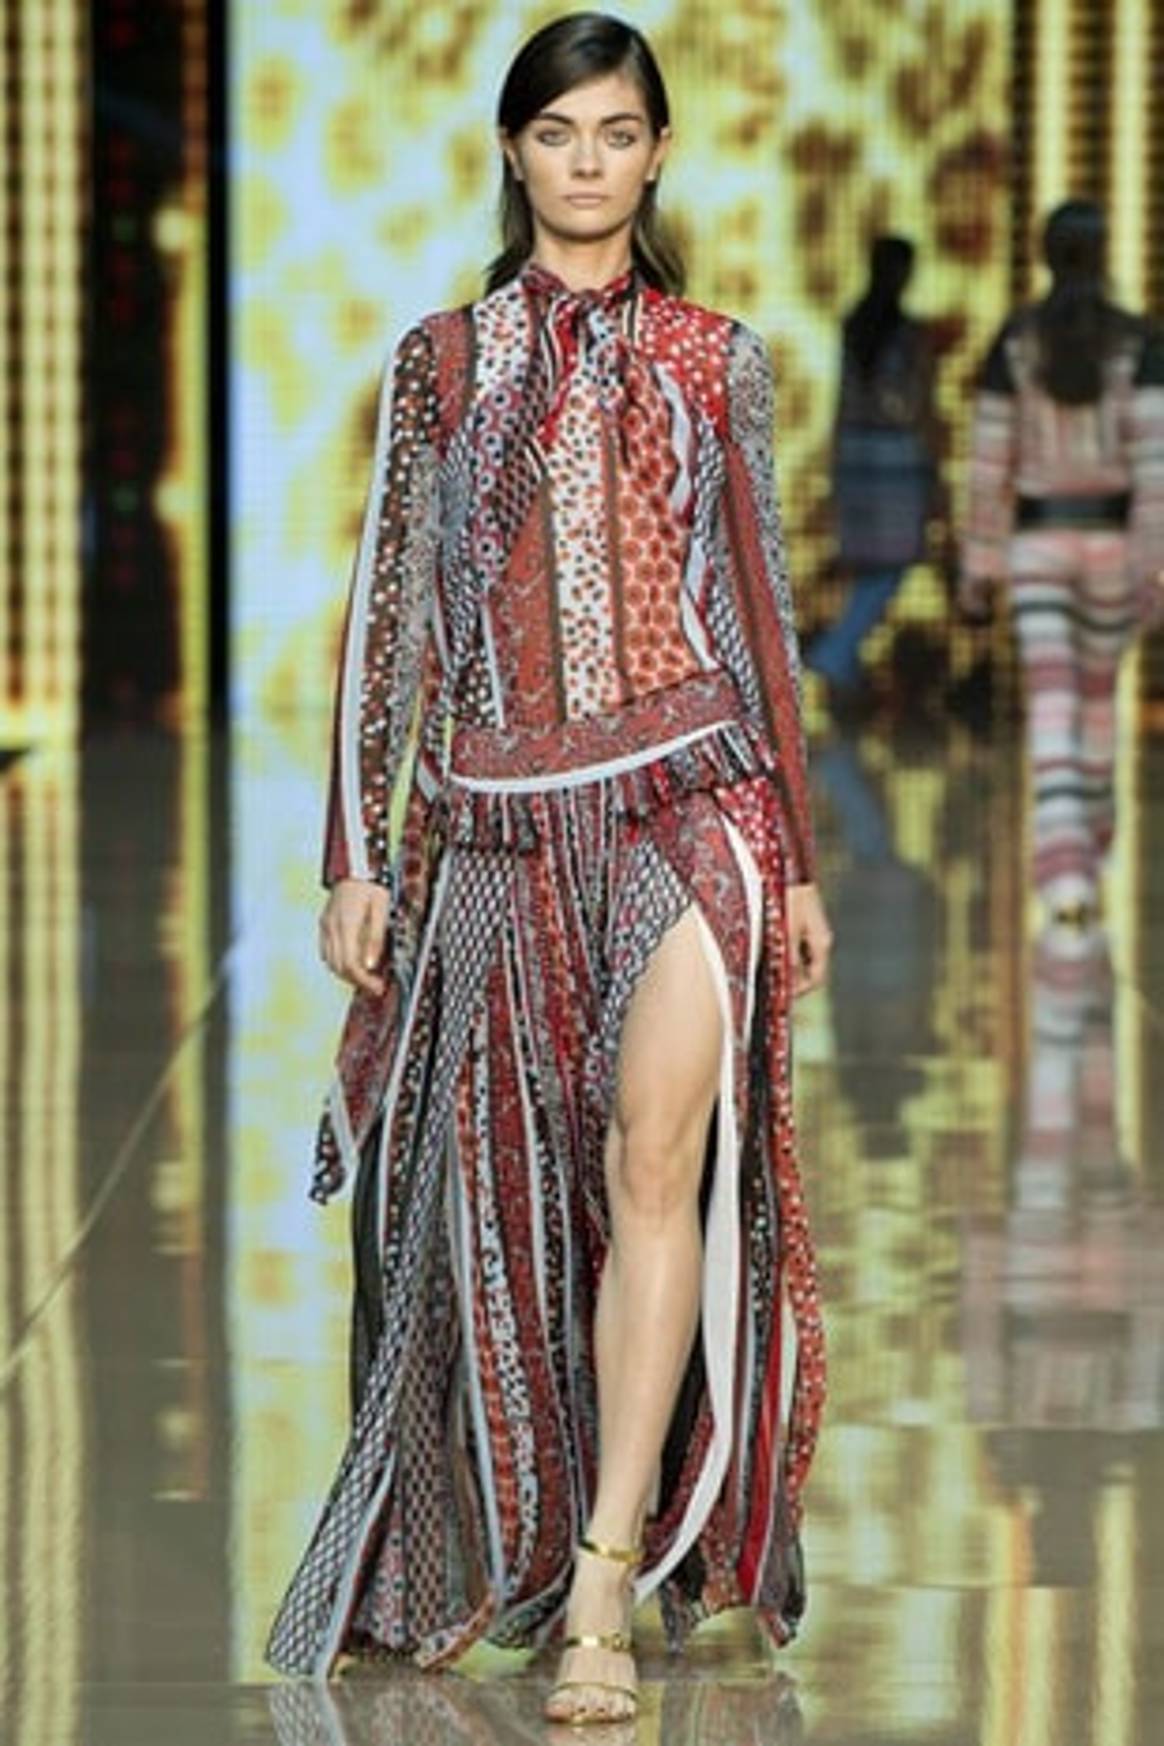 Armani makes waves as MFW 70s vibe continues